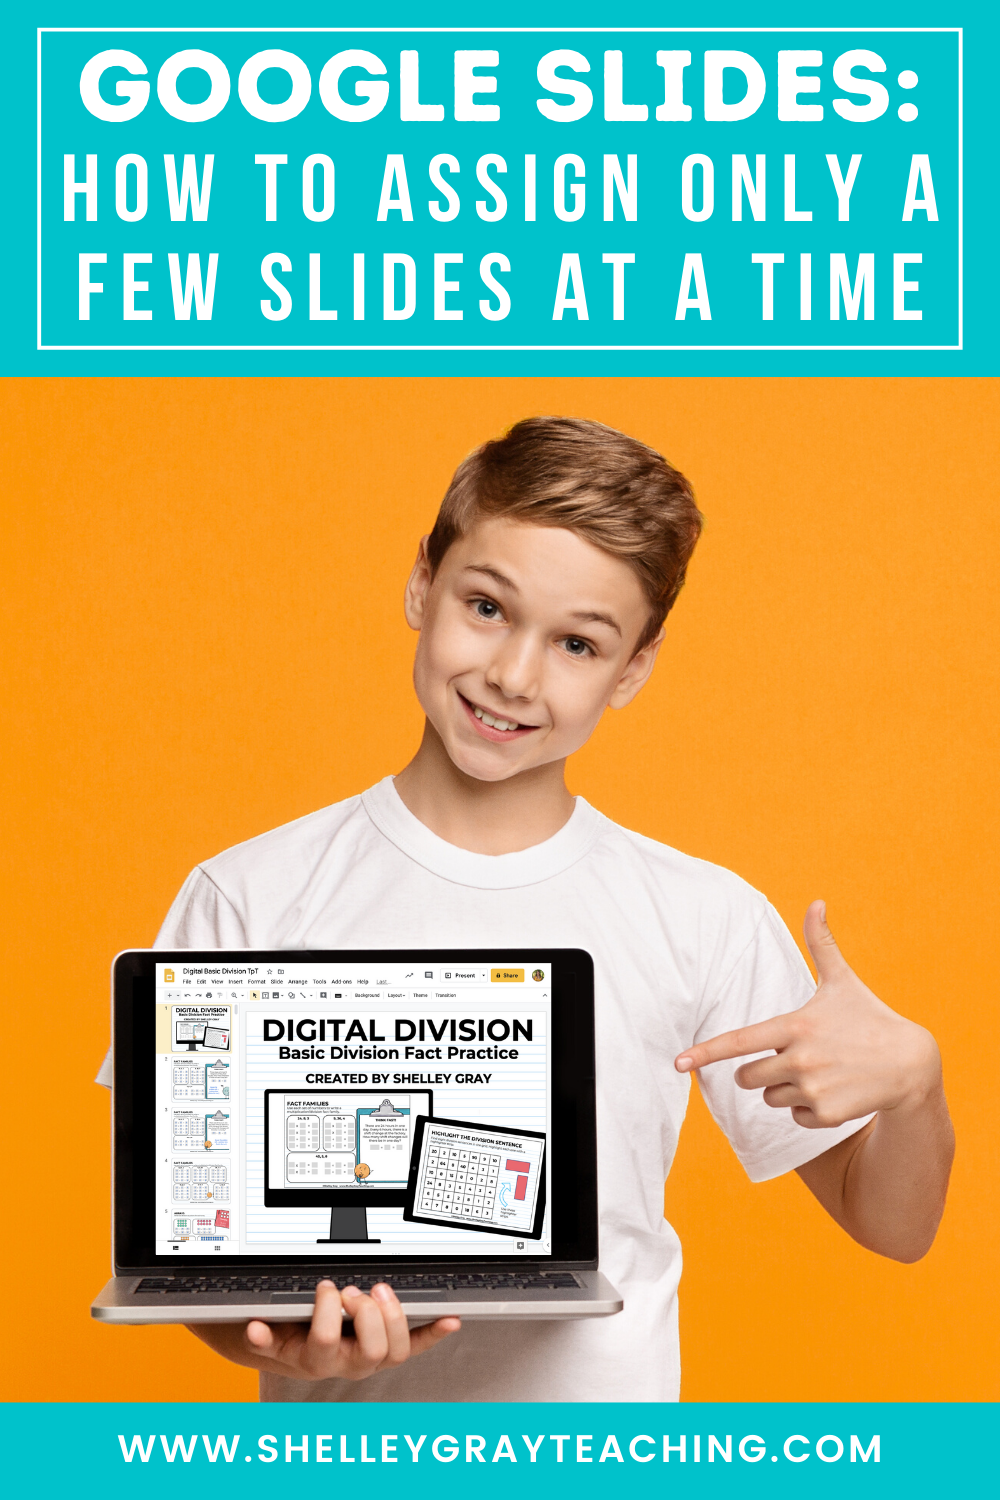 Google Slides: How to Assign Only a Few Slides at a Time